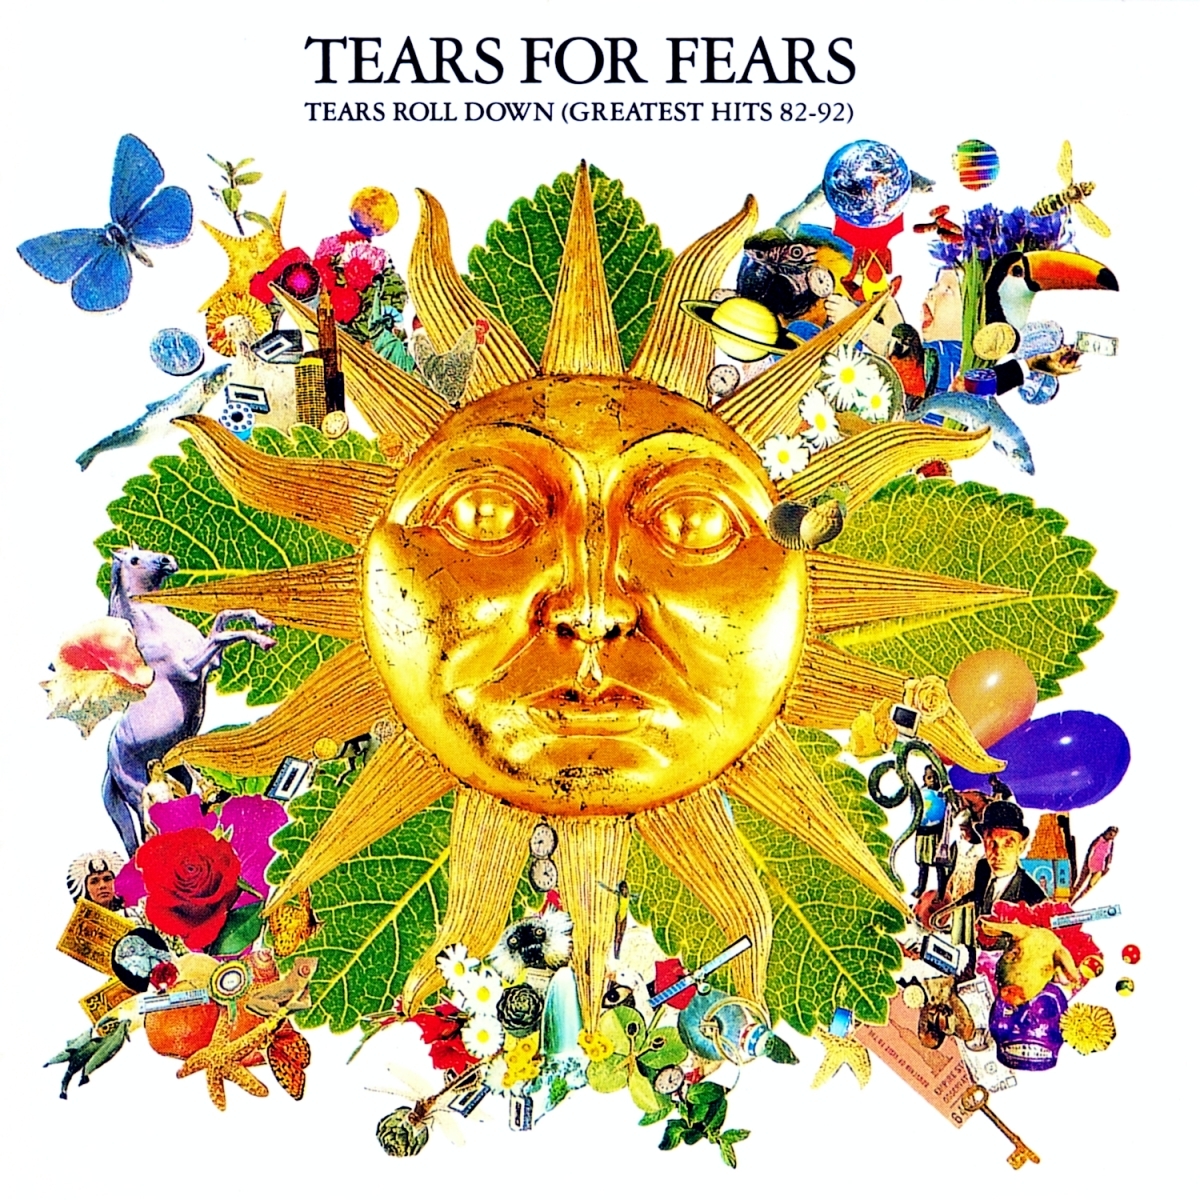 <p>After Orzabal and Smith had gone their separate ways, fans continued to love the music the duo made together. The band’s best-of collection, <a href="https://www.allmusic.com/album/tears-roll-down-greatest-hits-1982-1992-mw0000275343" class="CMY_Link CMY_Valid"><em>Tears Roll Down (Greatest Hits 82-92)</em></a>, featured some of their biggest hits to date.</p>